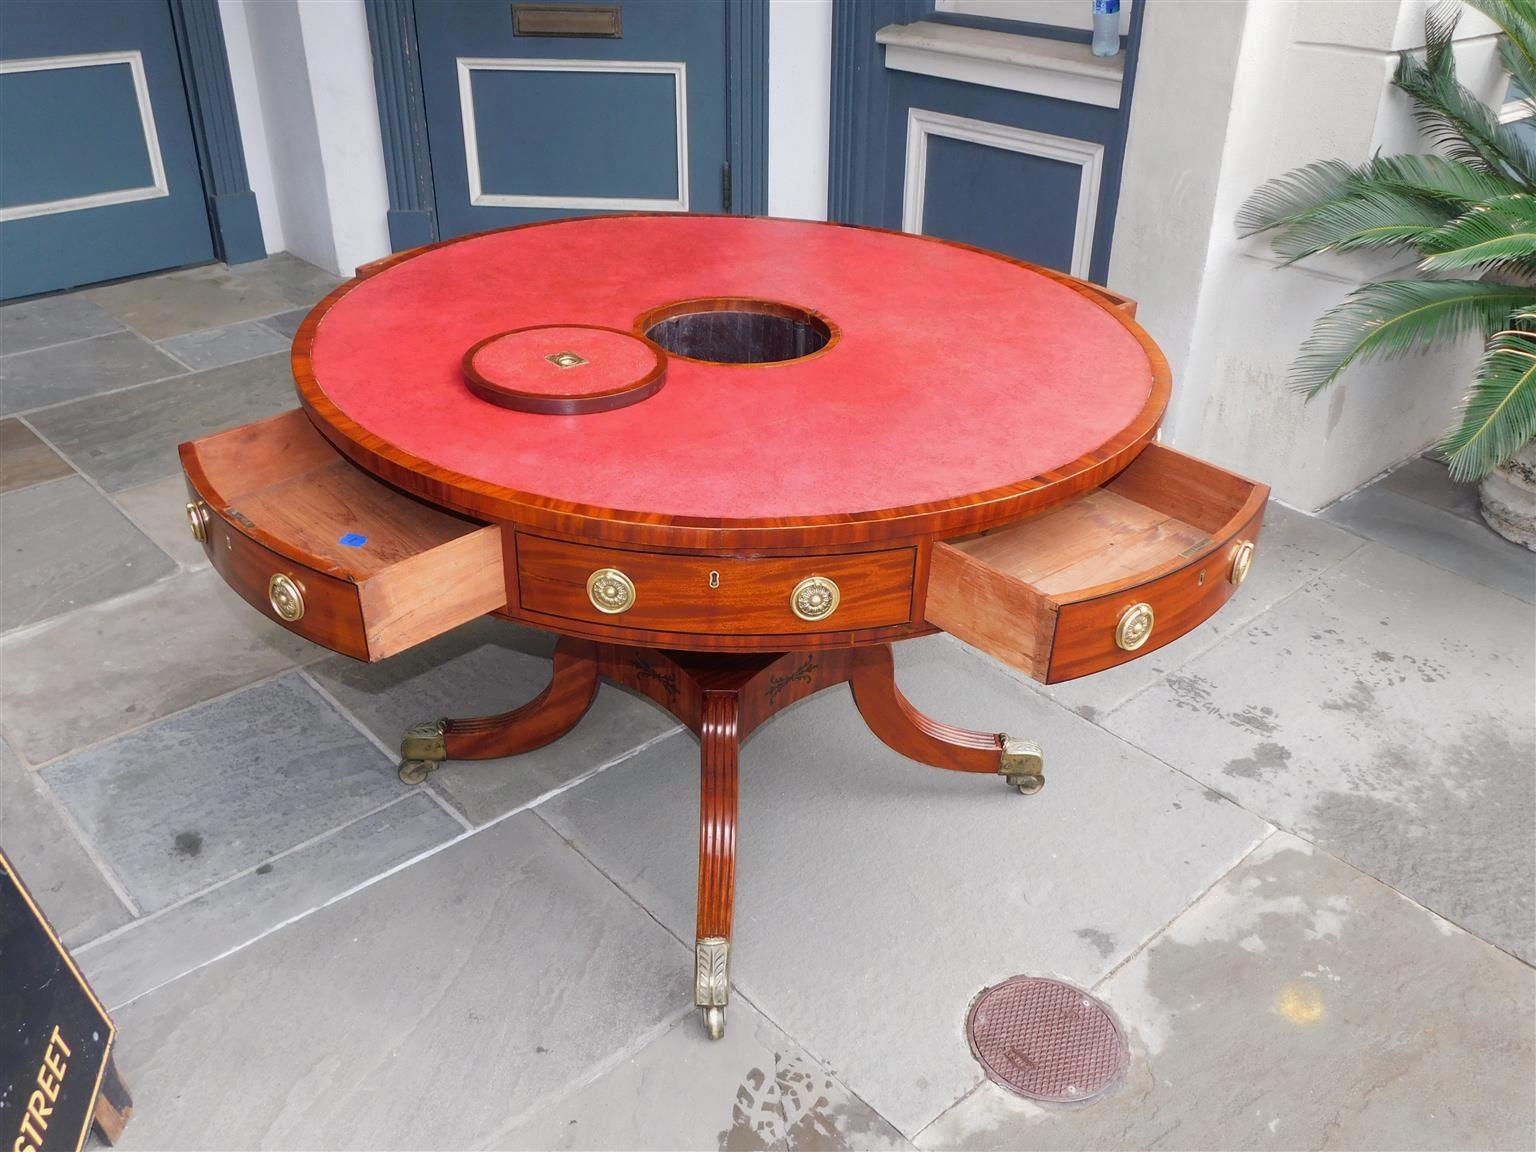 English Regency Mahogany Leather Top Ebony Inlaid Rent Table, Circa 1790 For Sale 4